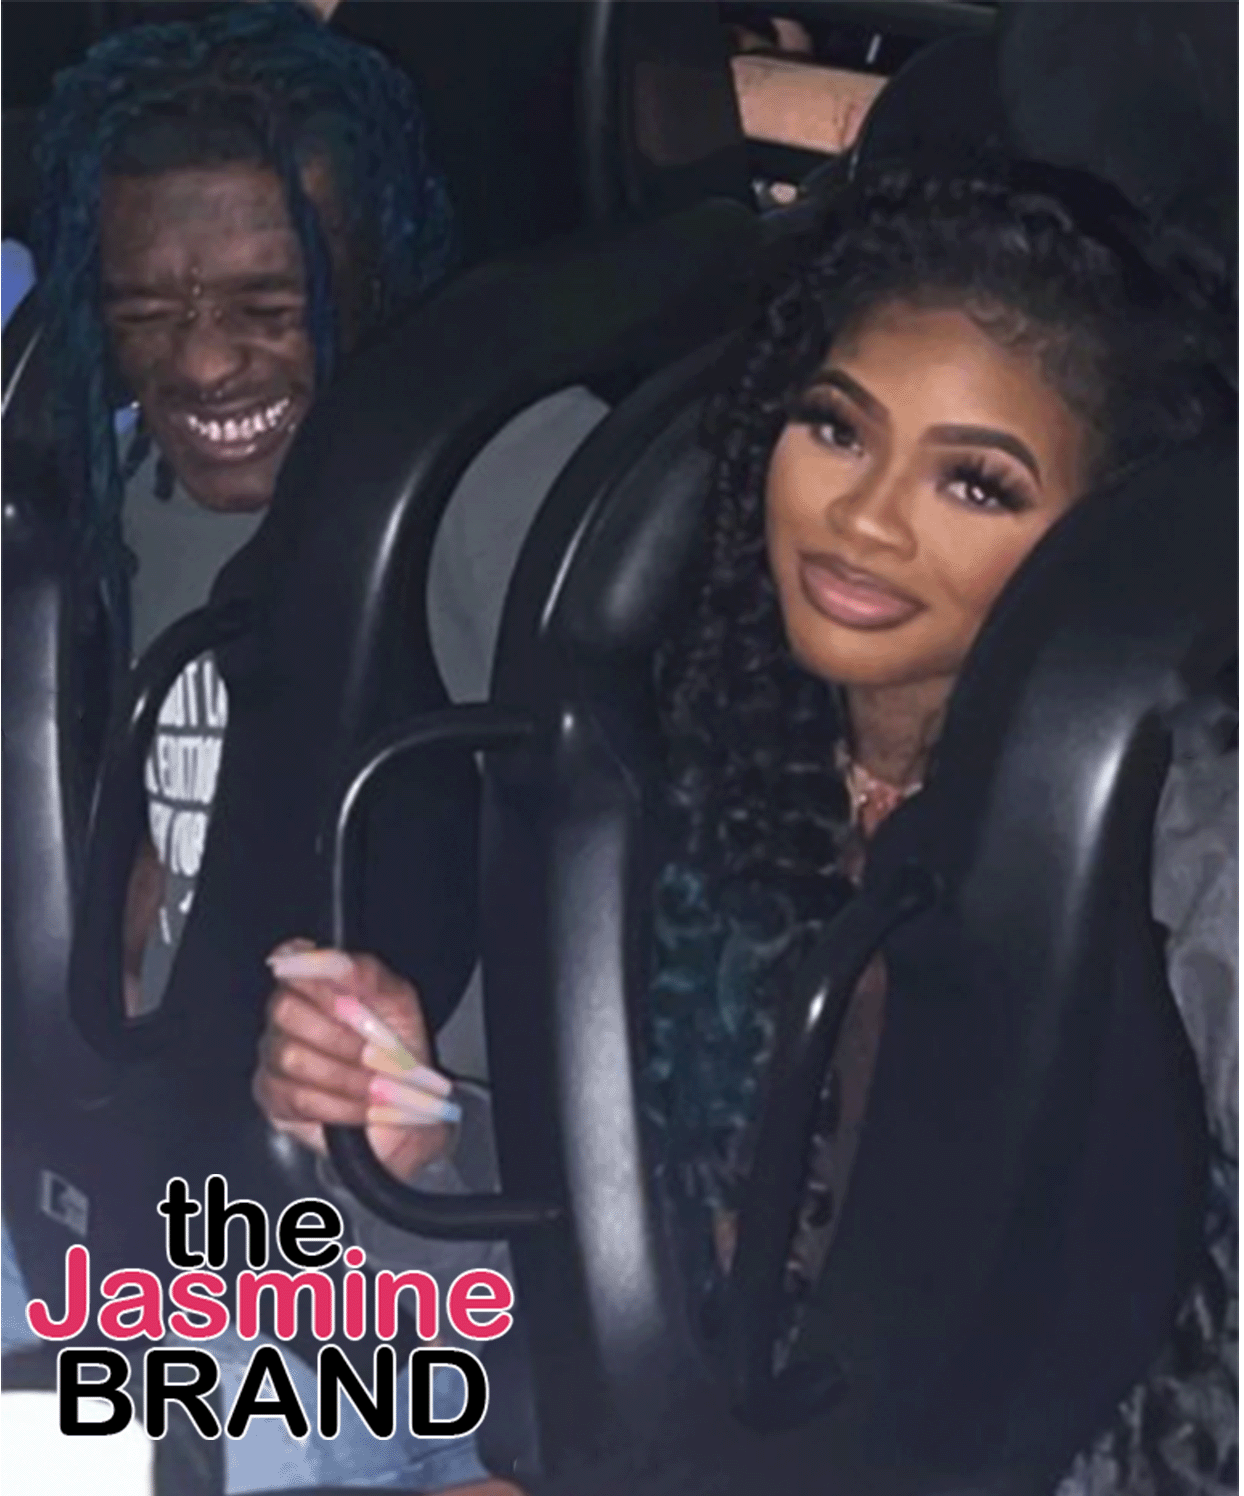 Meek Mill Shares New Photo Of His & Milan Harris' Son With A Head Full Of  Hair, Shares I Just Bought My House - theJasmineBRAND